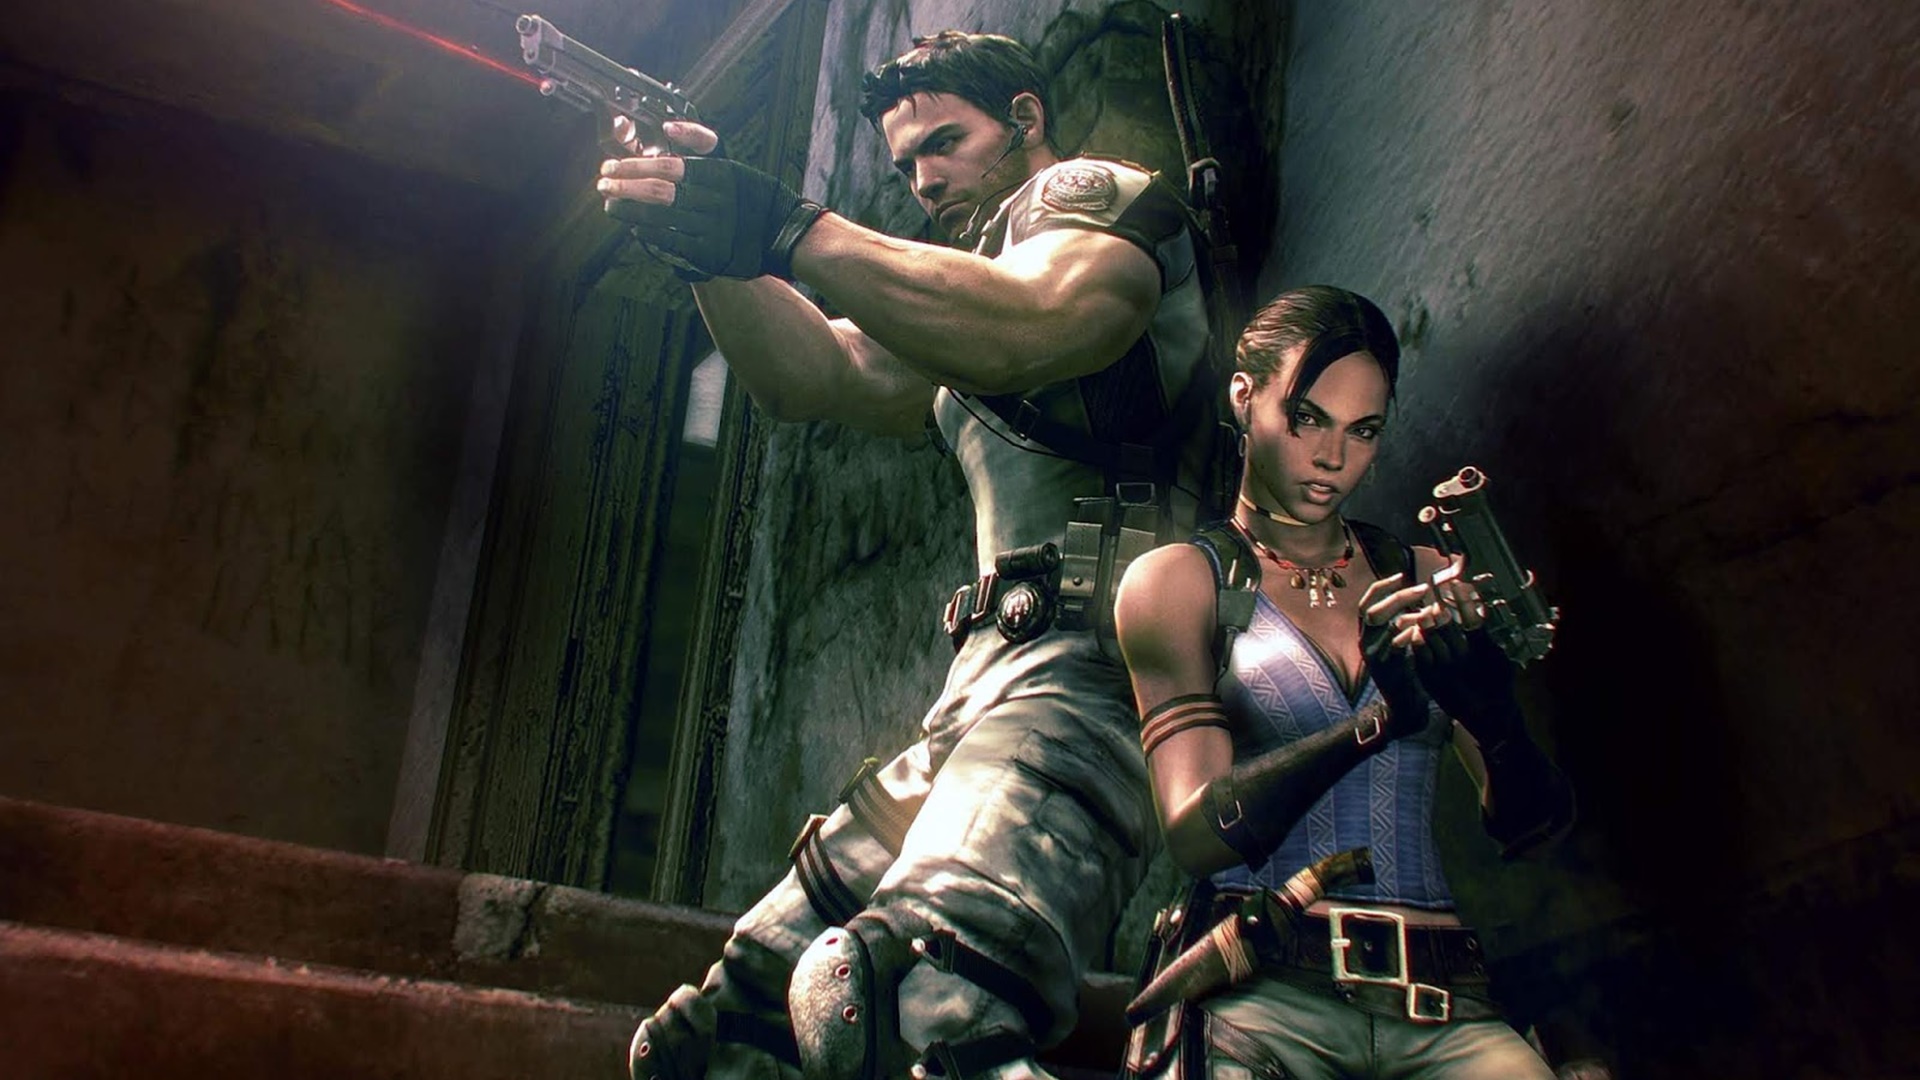 Resident Evil 5 remake would not currently be in production, according to Dusk Golem.